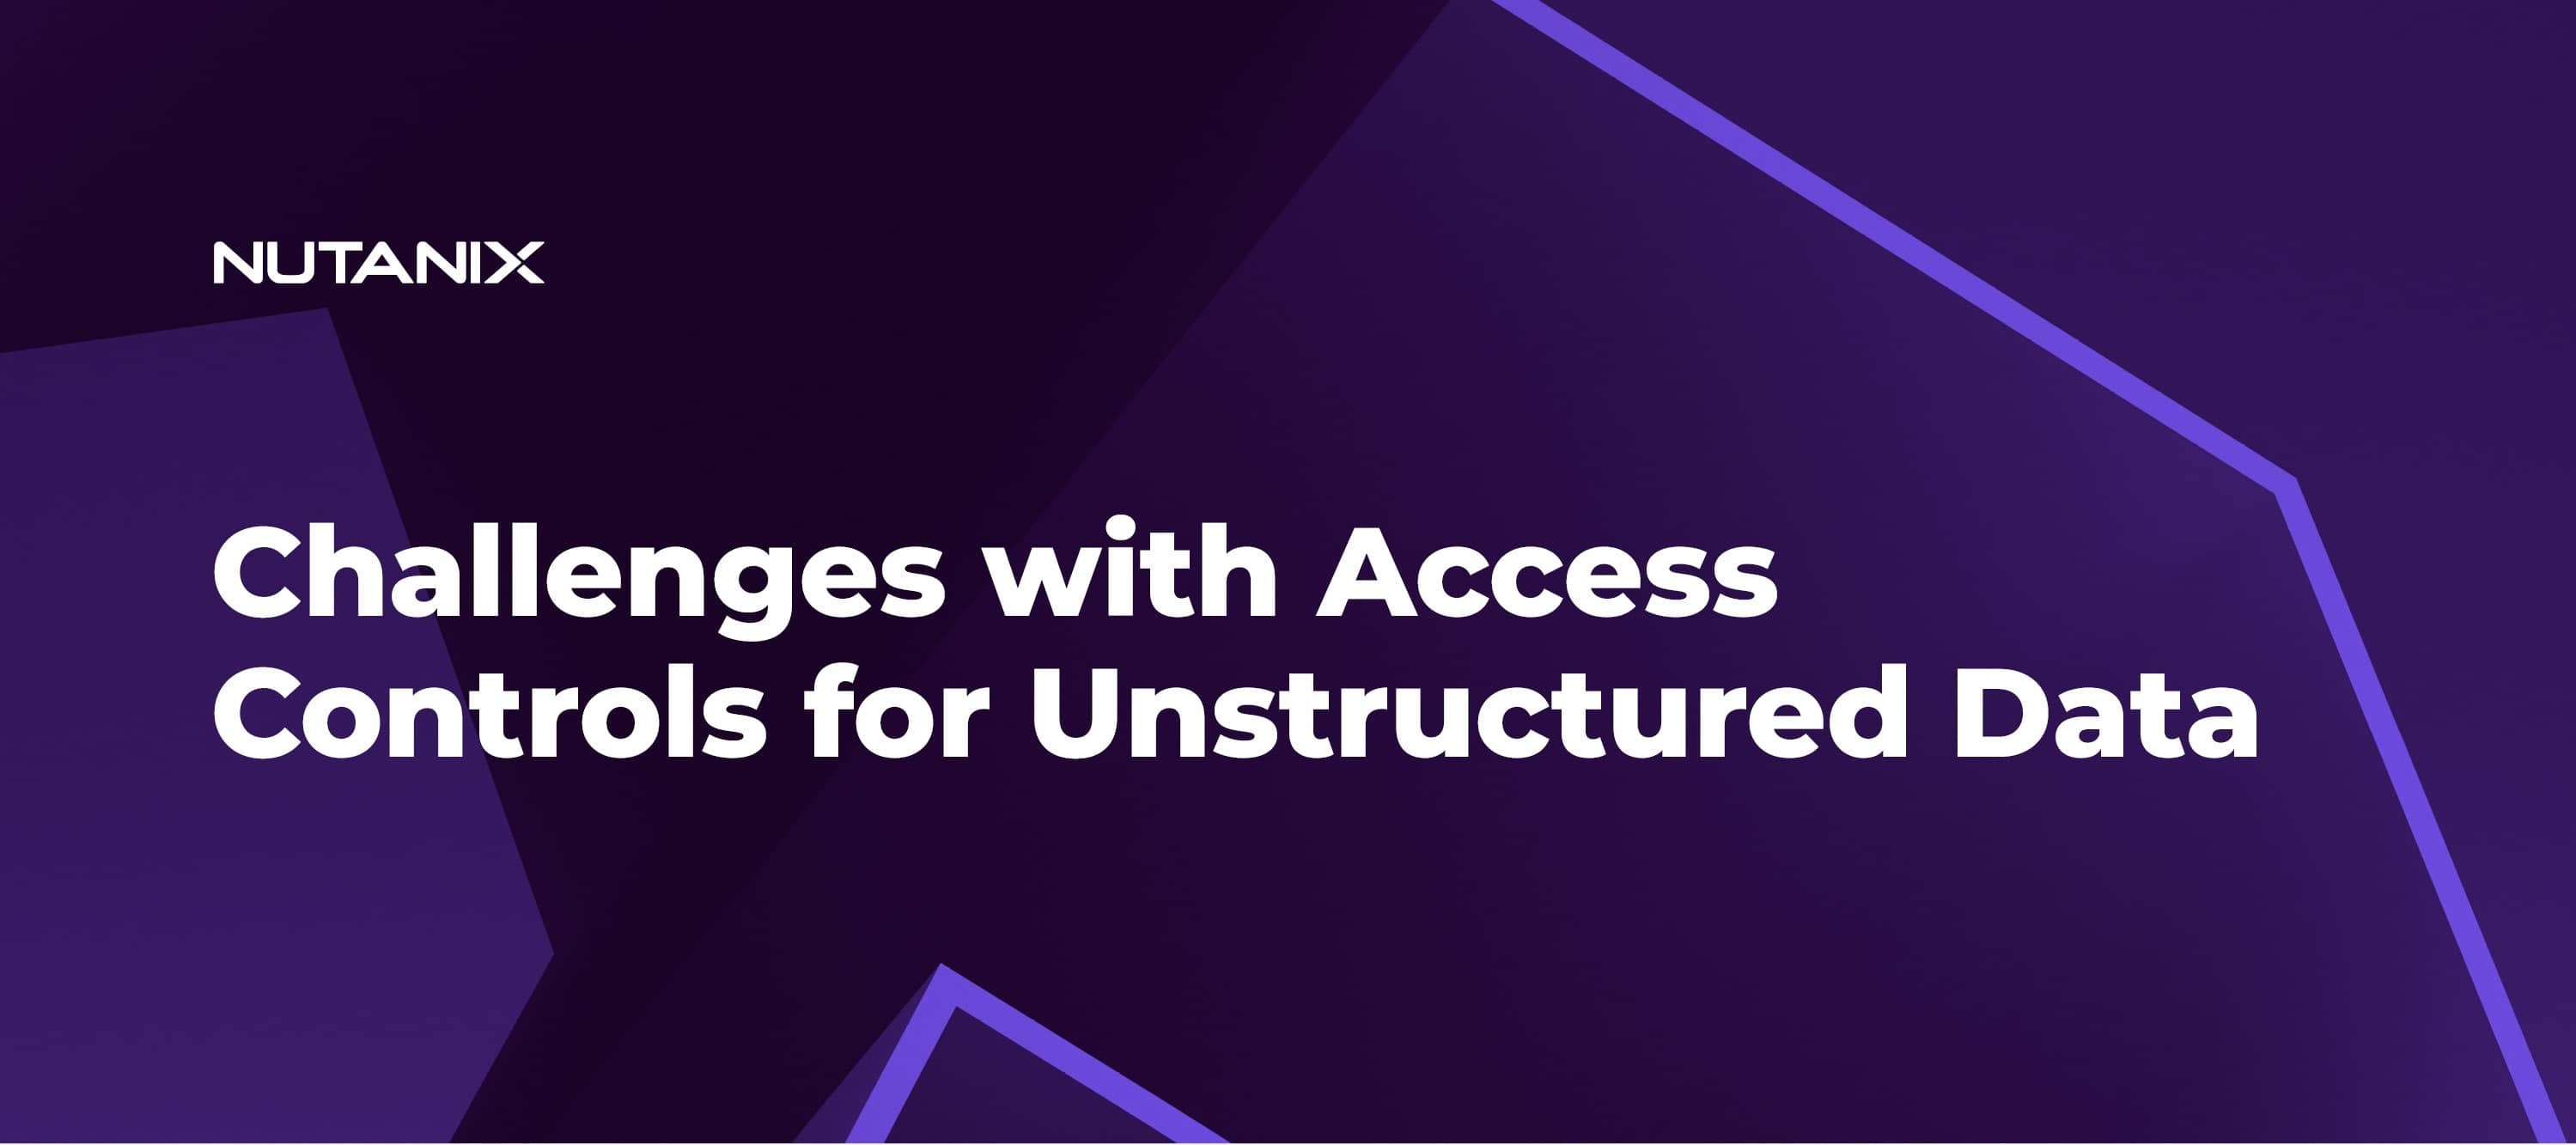 Challenges with Access Controls for Unstructured Data